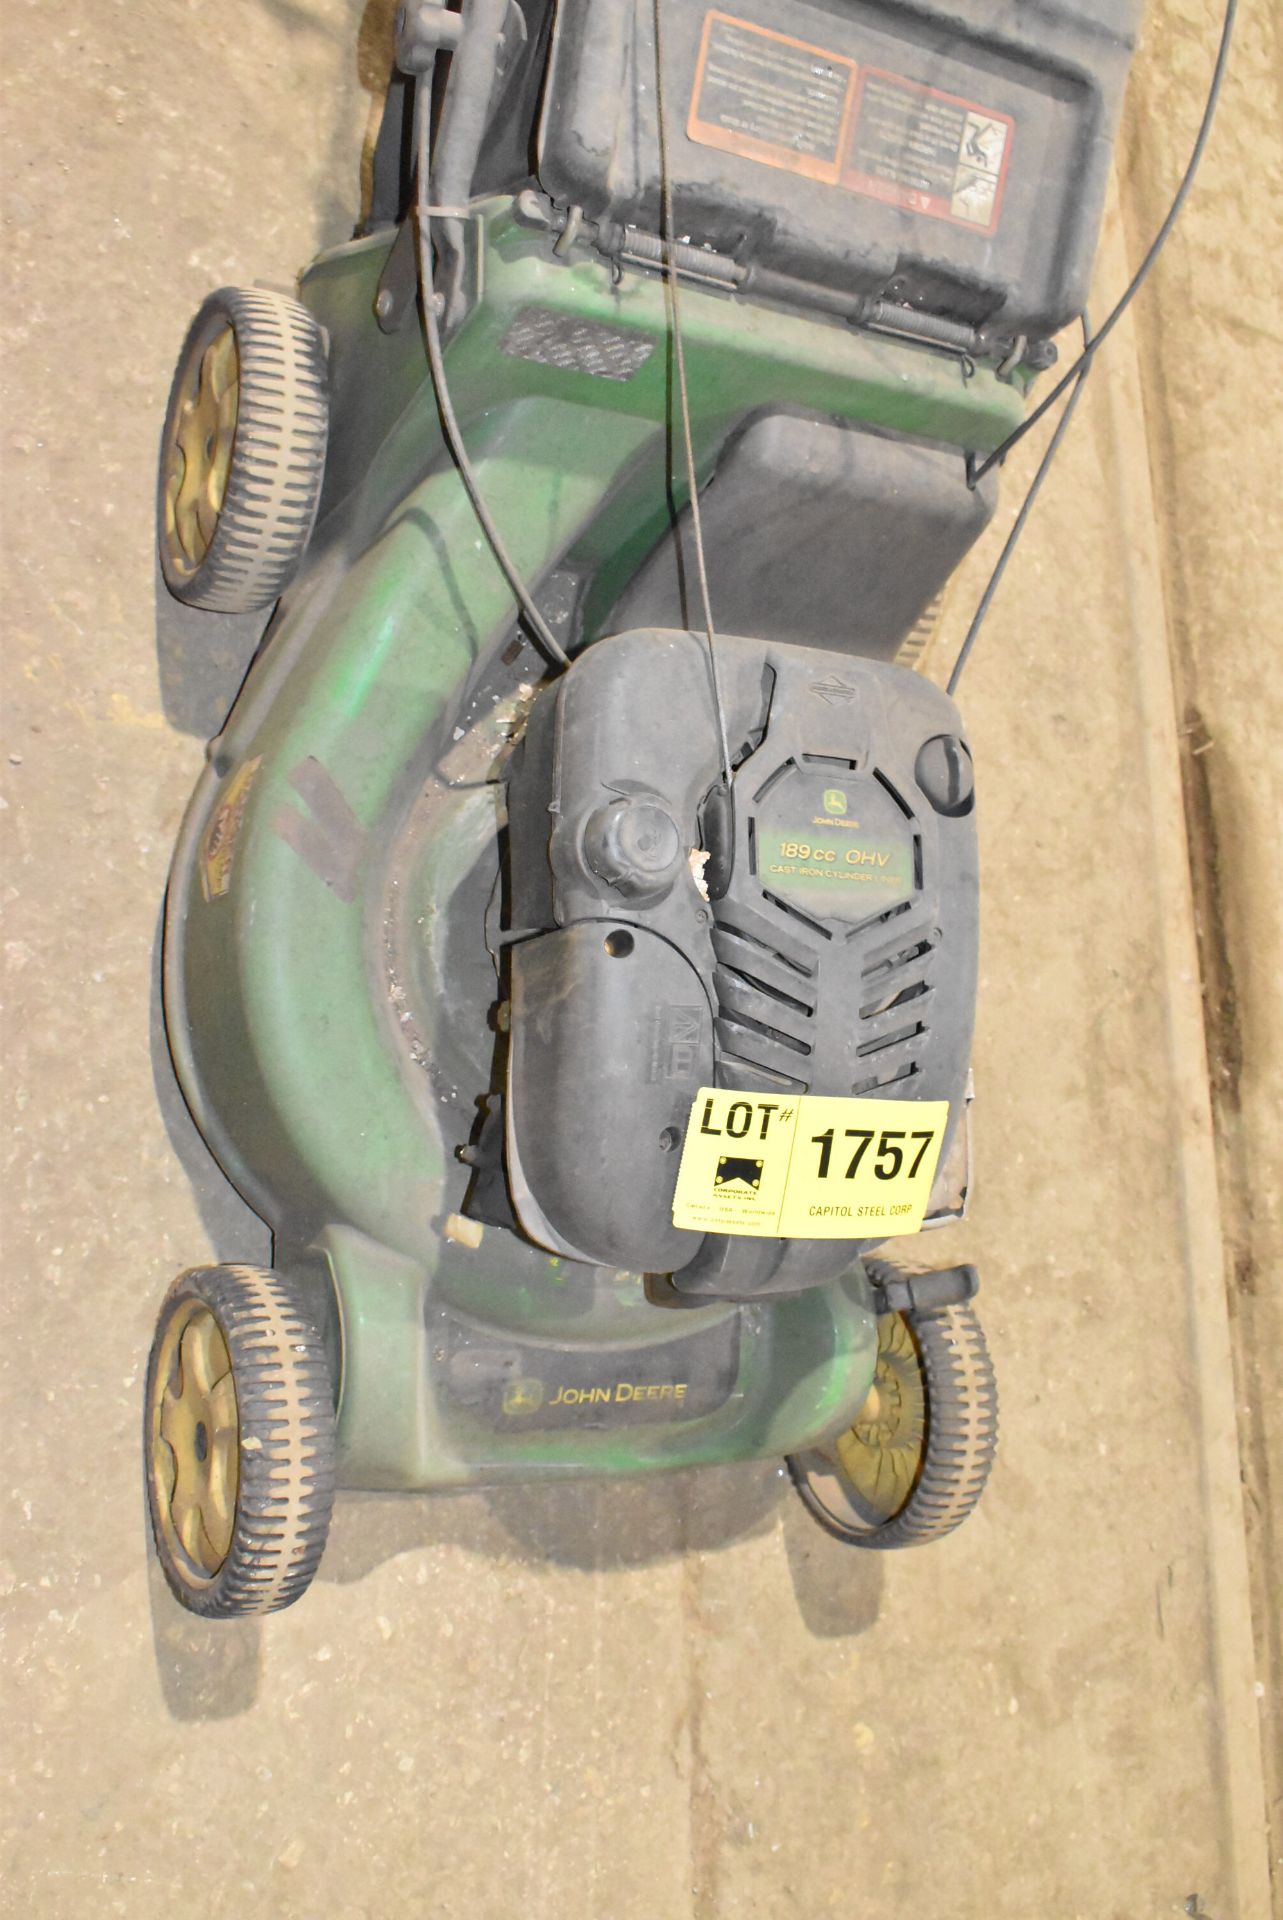 JOHN DEERE GAS POWERED LAWN MOWER [RIGGING FEES FOR LOT #1757 - $30 USD PLUS APPLICABLE TAXES] - Image 2 of 5